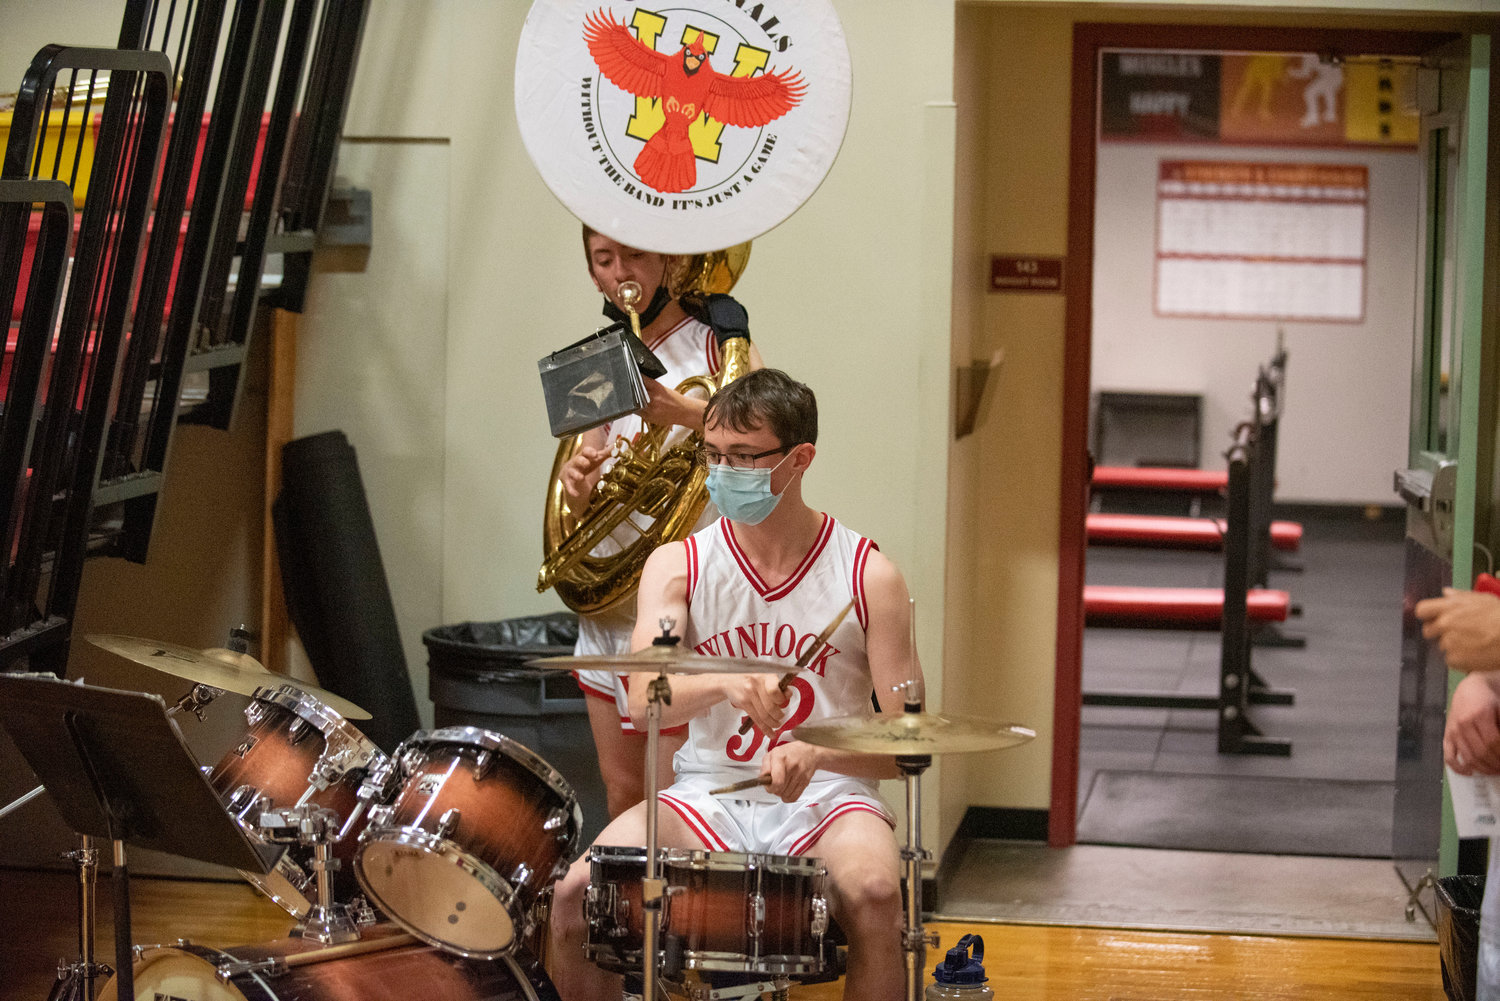 Winlock's band performs during a girls basketball game against Onalaska on Dec. 10.